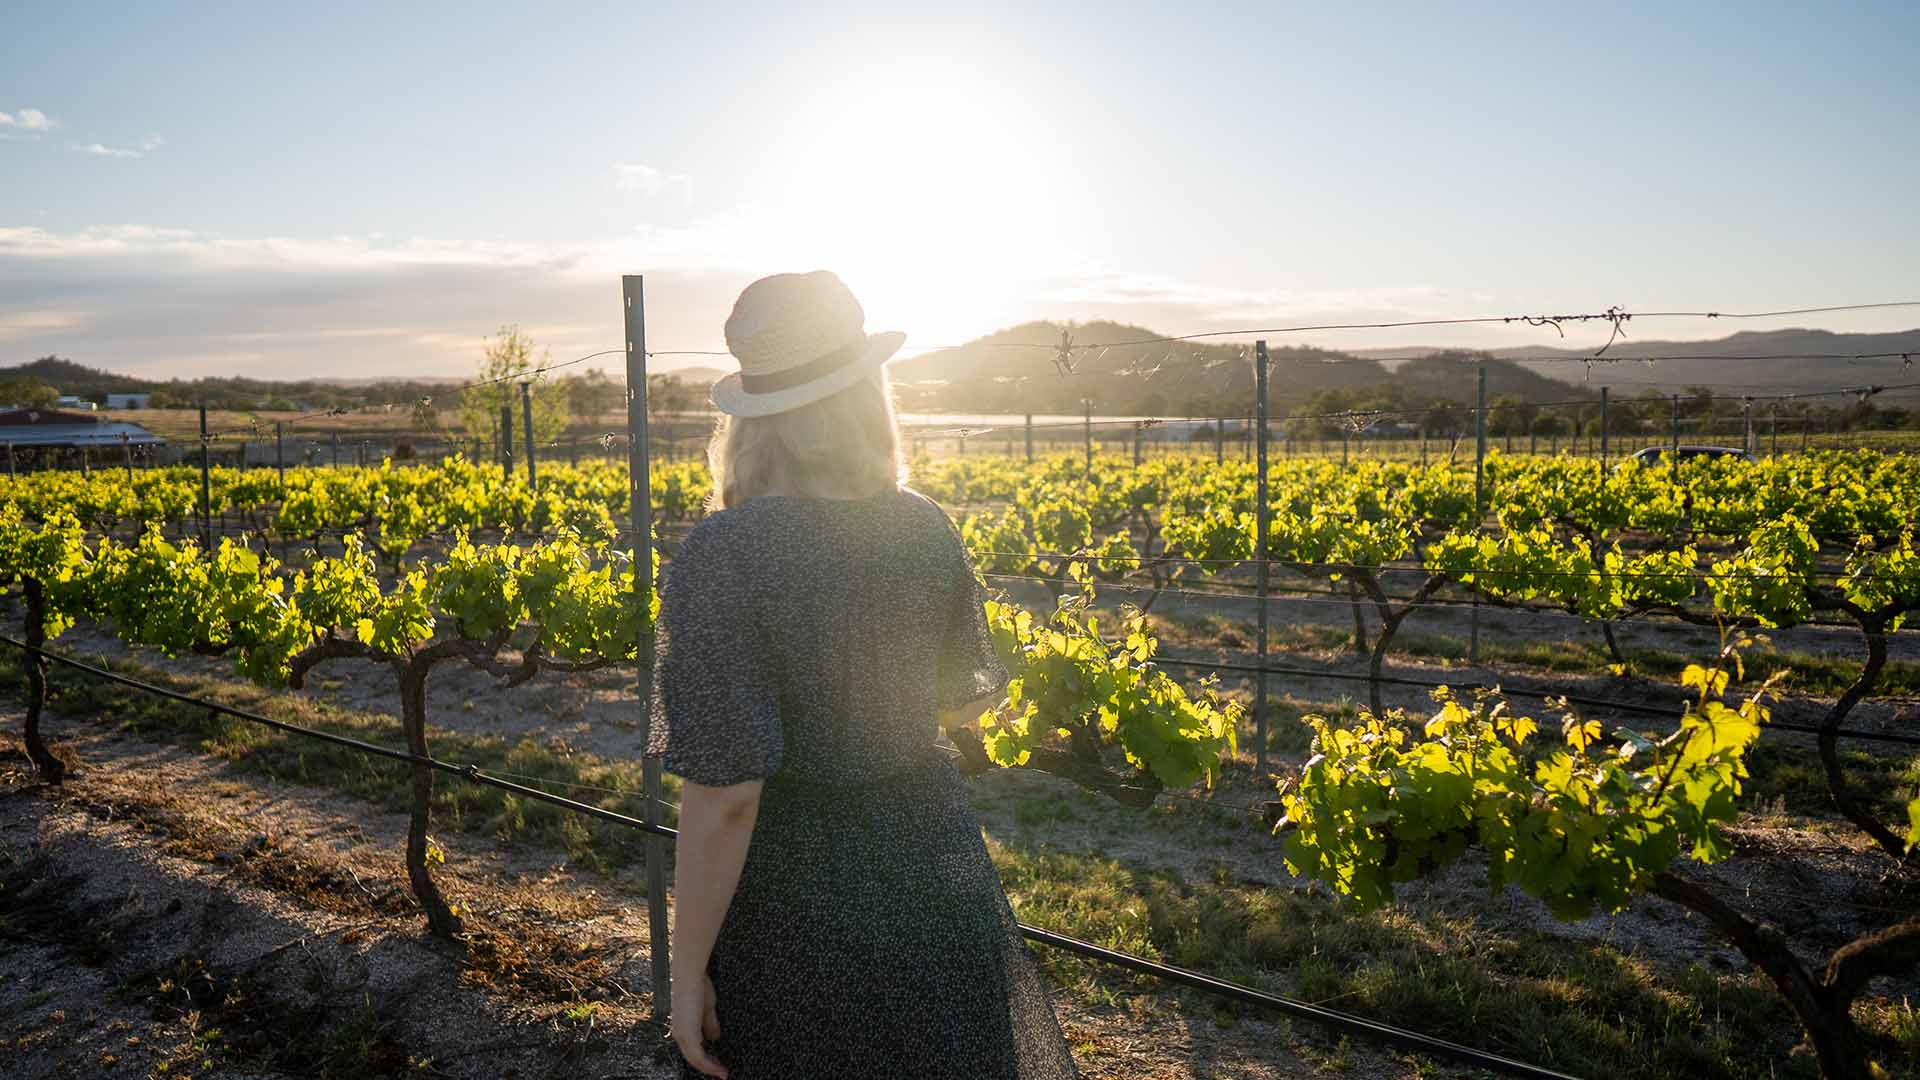 Queensland Is Now Home to a Self-Guided Wine Trail That Showcases More Than 70 Wineries